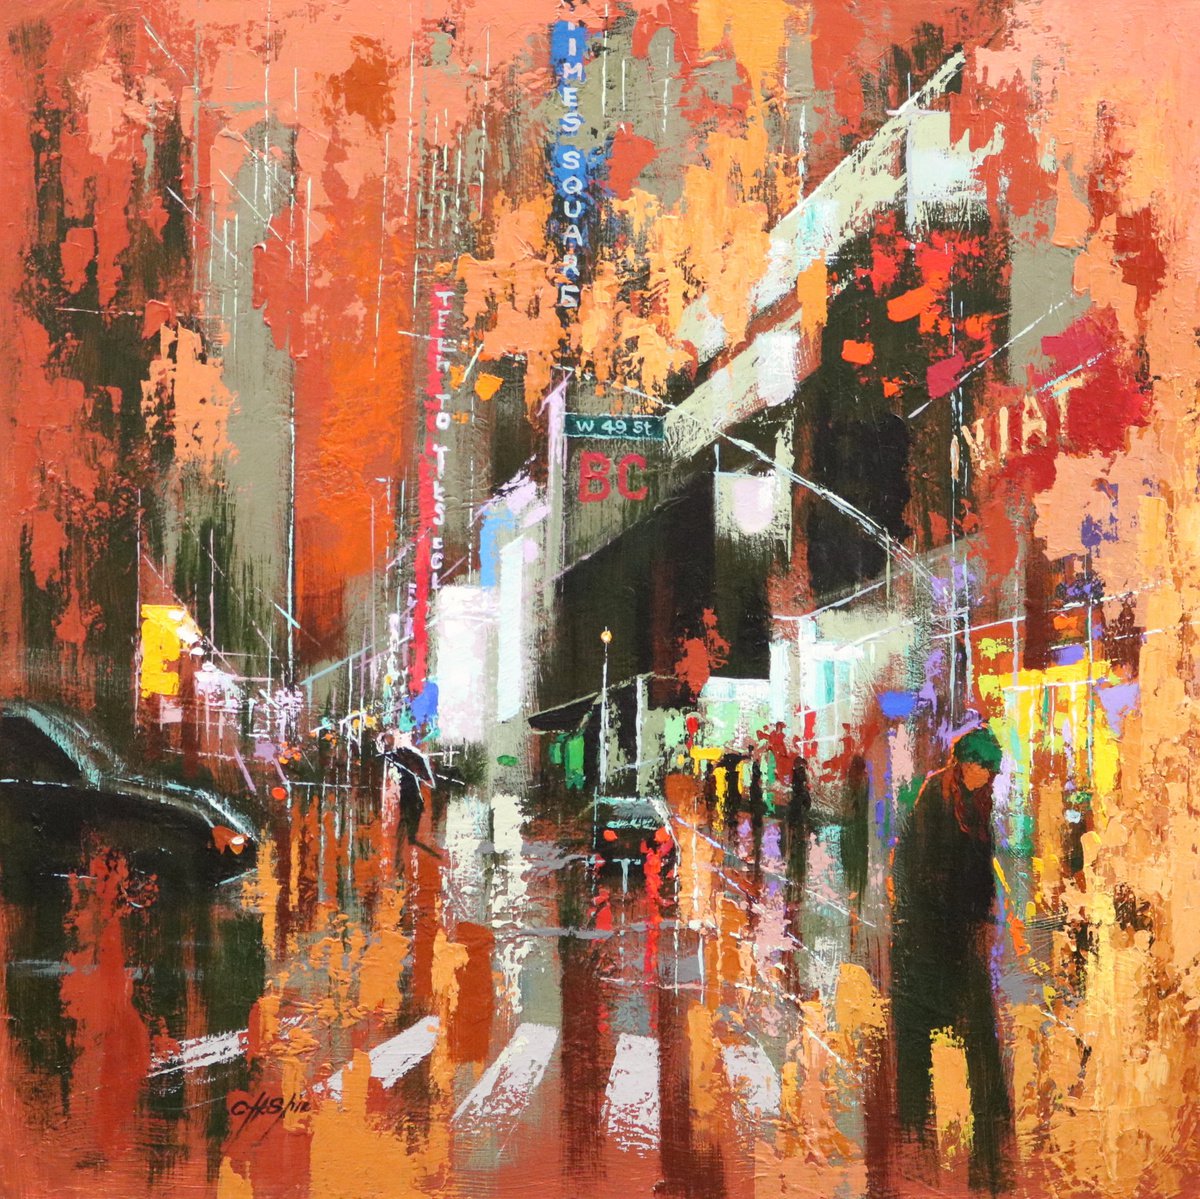 A Journey to Time-Square by Chin H Shin